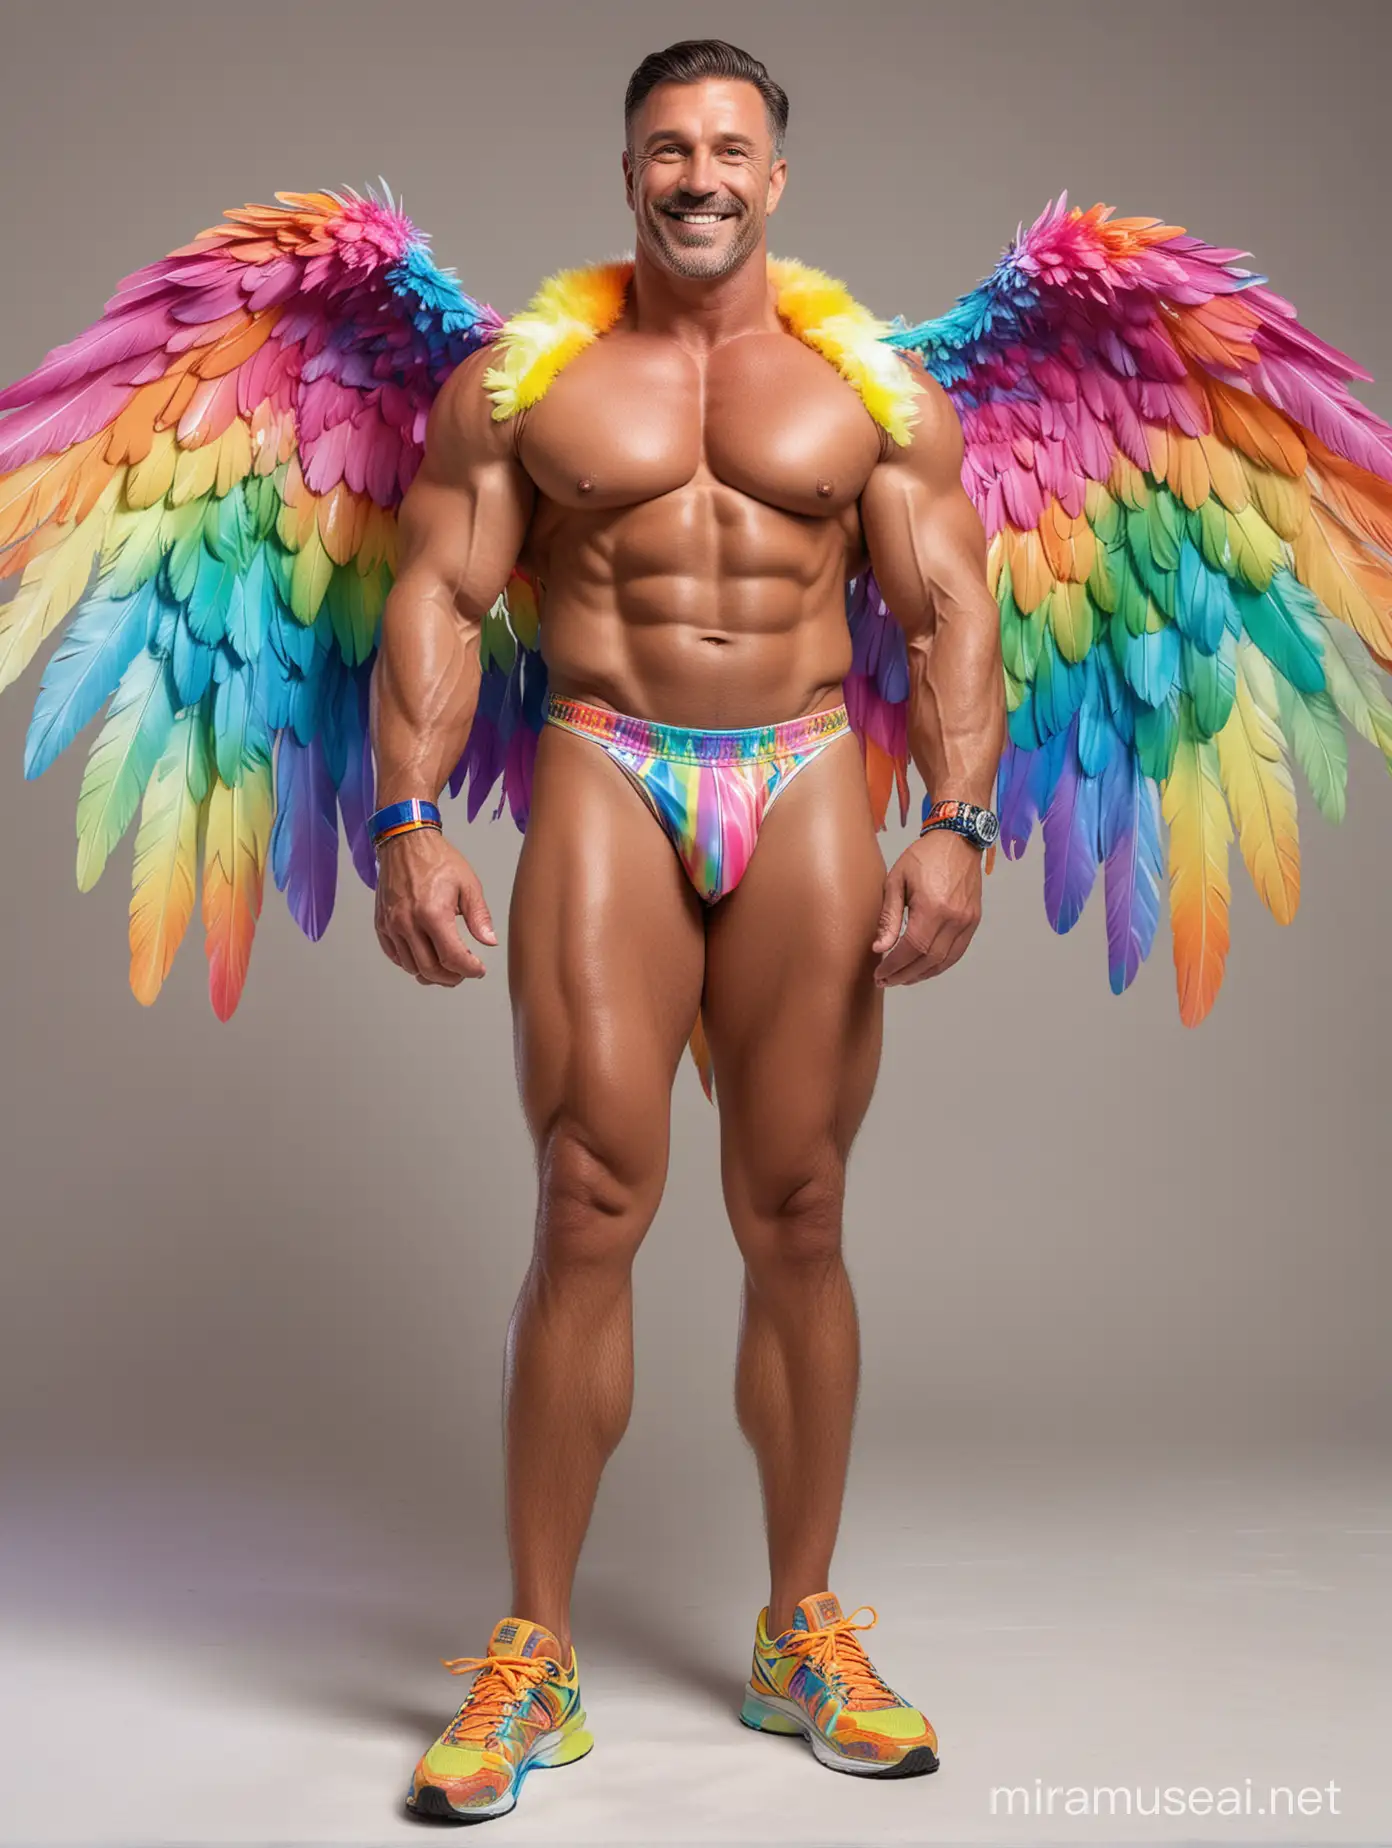 Cheerful Topless 40s Bodybuilder Daddy in Colorful Rainbow Jacket with Eagle Wings Flexing